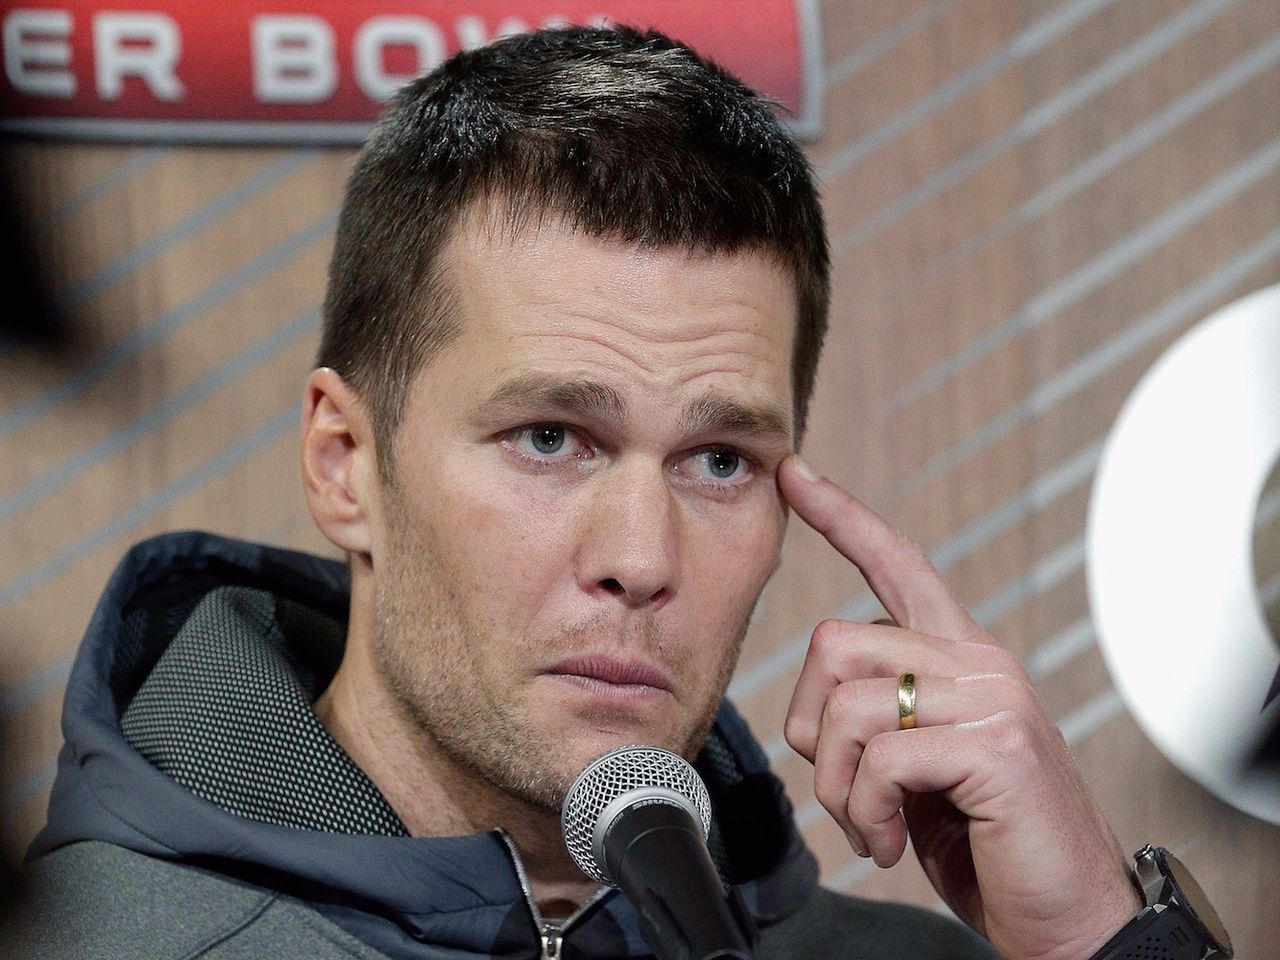 tom-brady-once-again-sidesteps-questions-about-trump-asks-reporter-whats-going-on-in-the-world